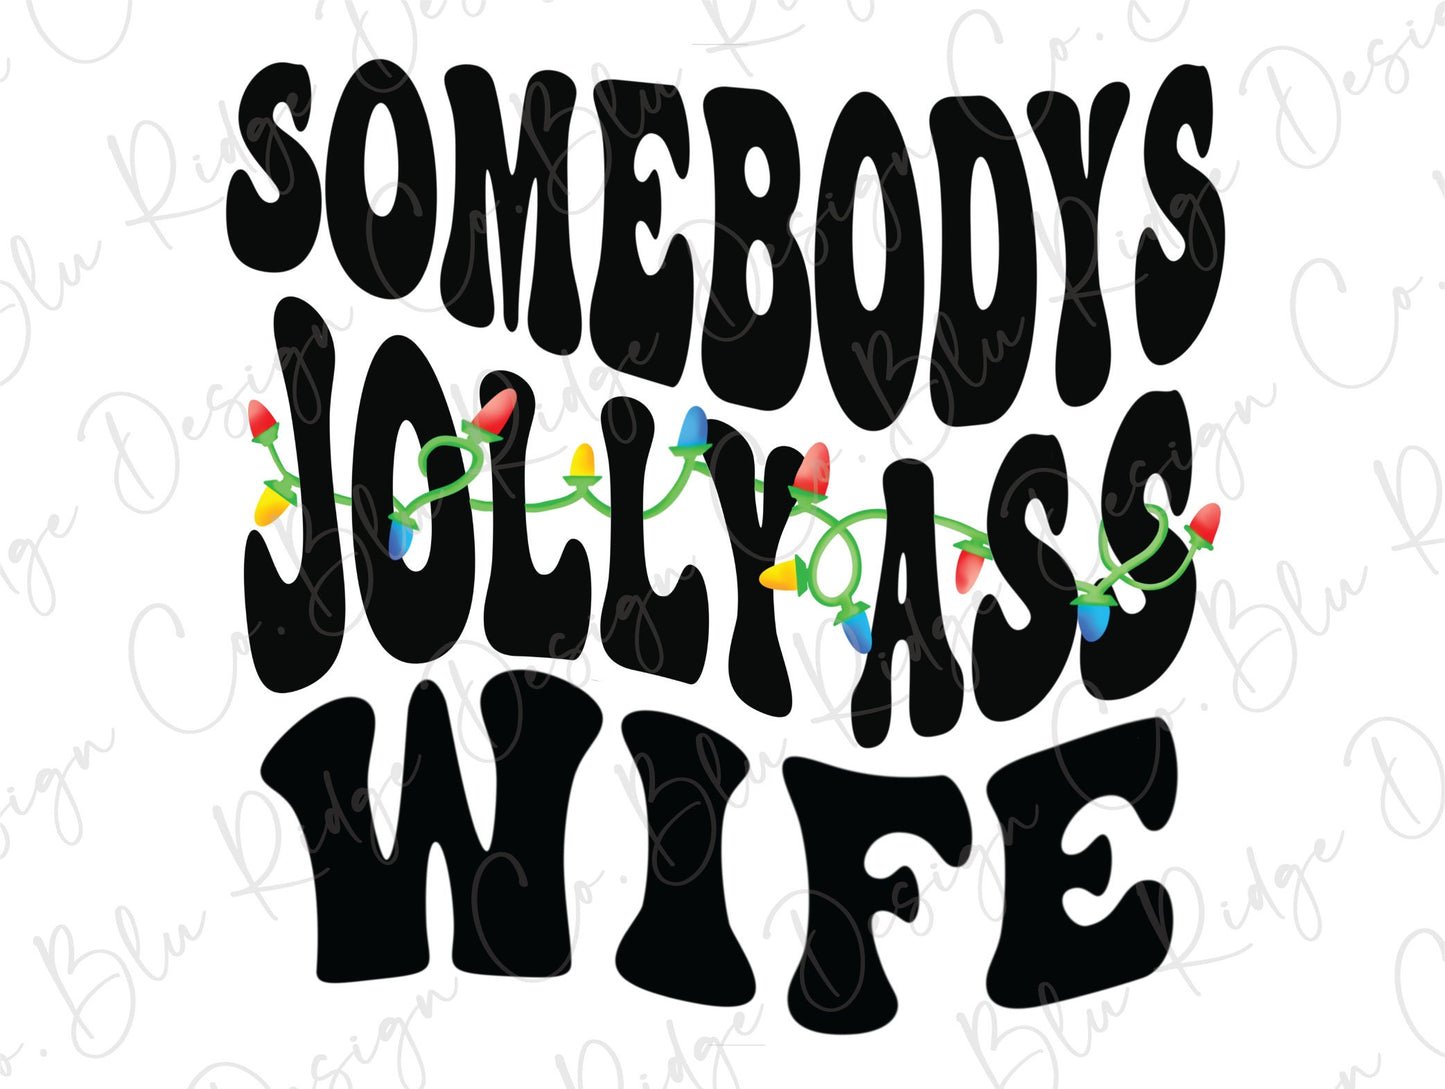 Somebody's Jolly Ass Wife Christmas Lights Direct to Film (DTF) Transfer